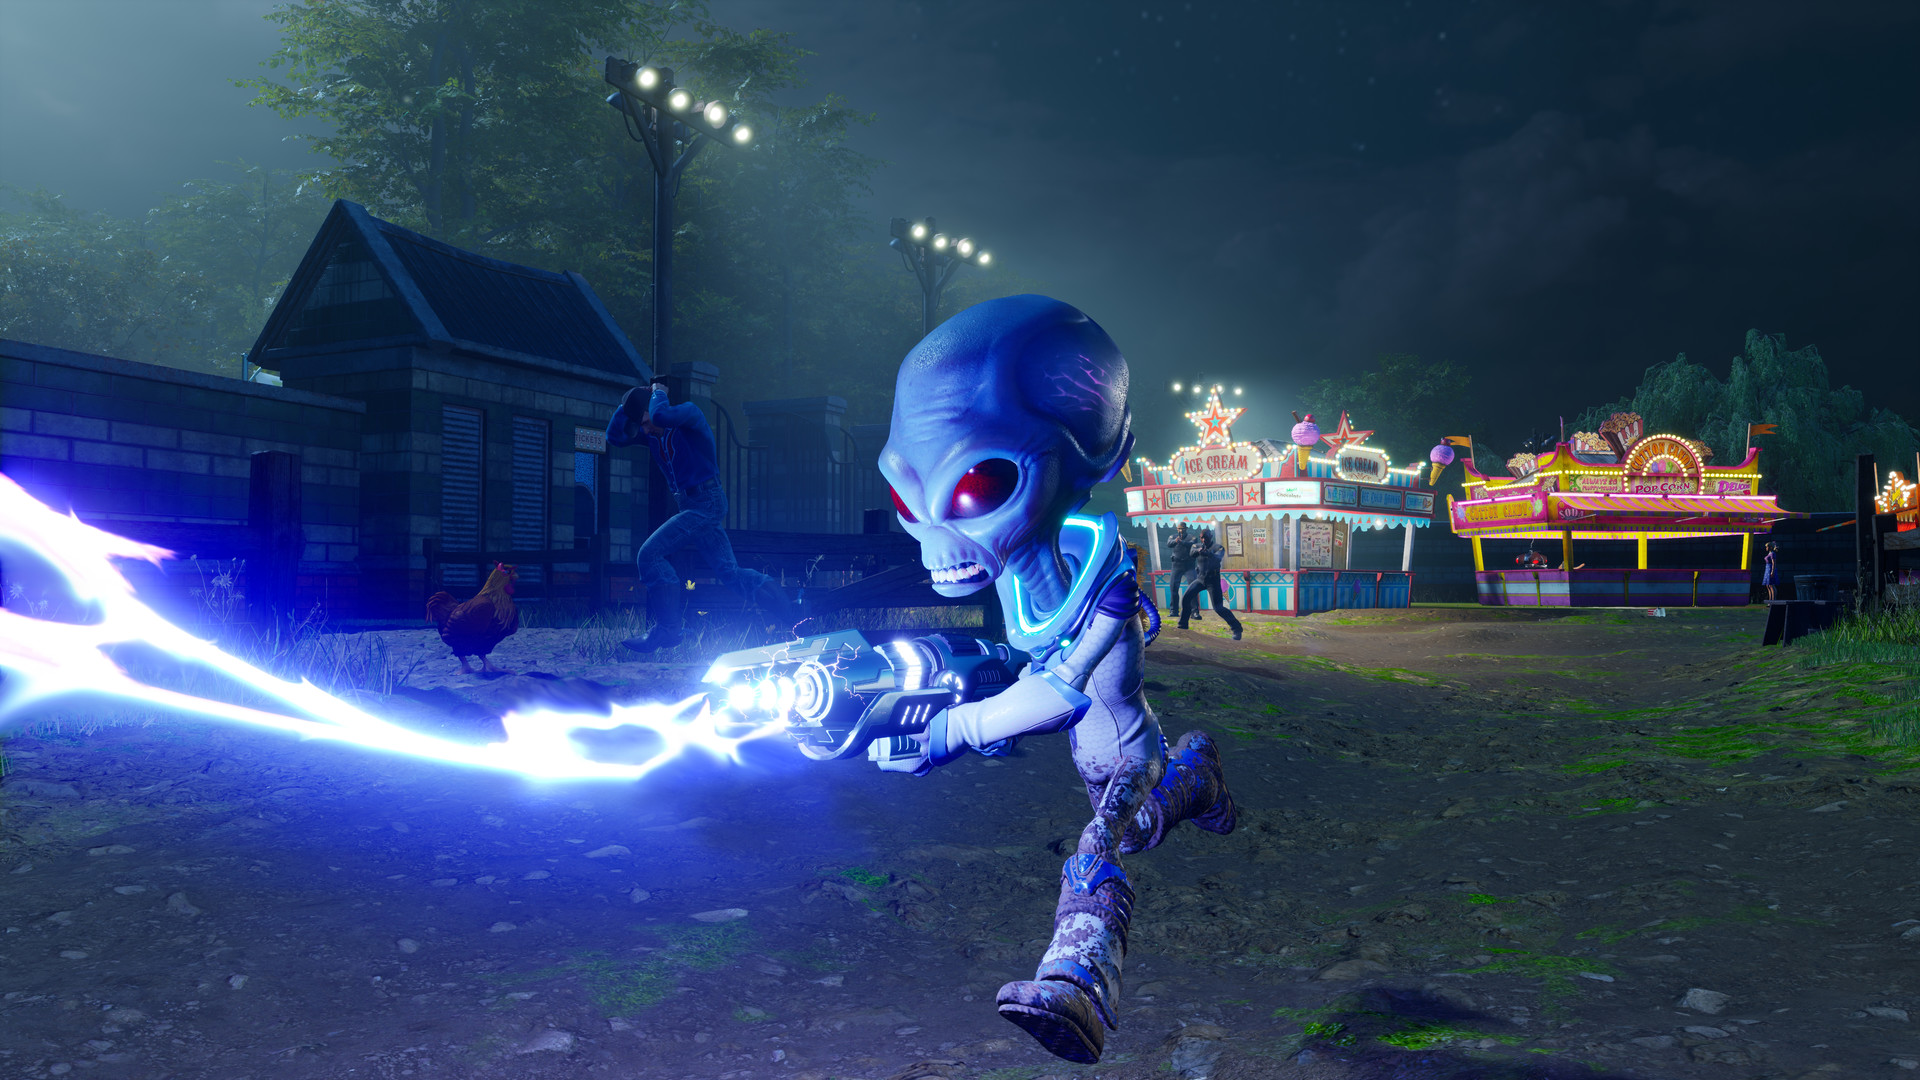 Destroy all humans download pc